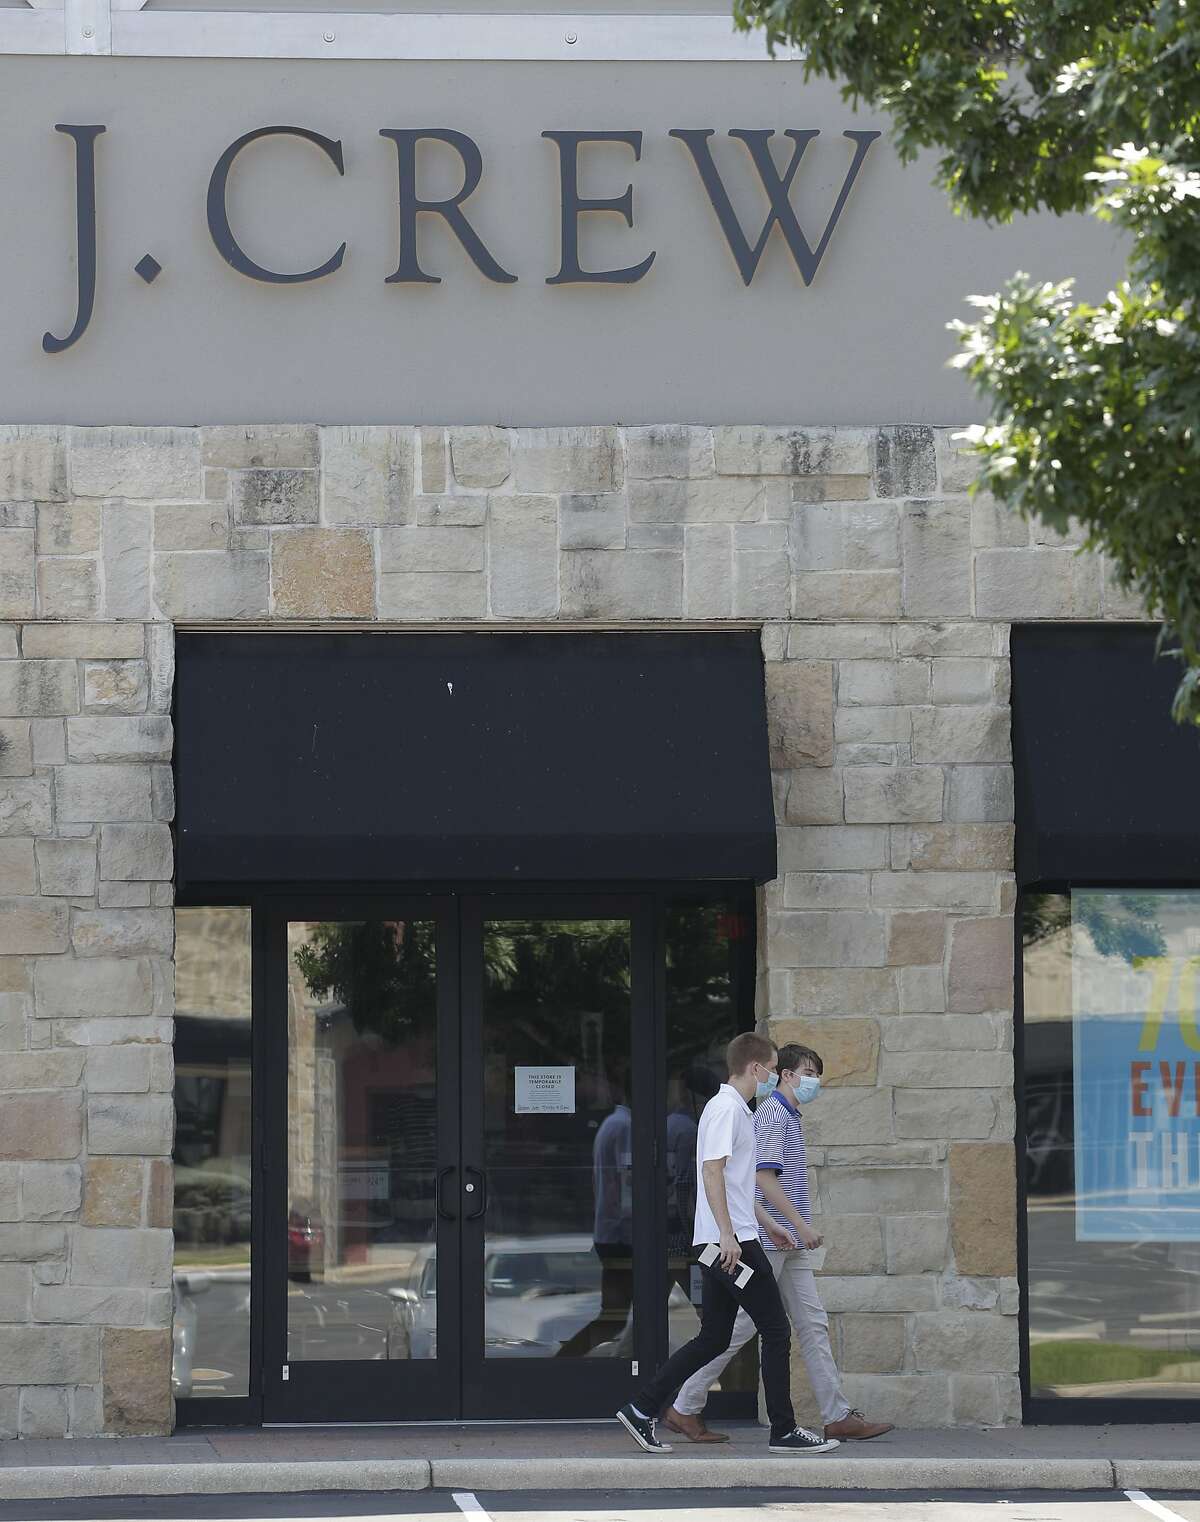 1. J. Crew Annual revenue: $2.5 billion in 2019 Number of stores: 492 Founded: 1947 On May 4, J. Crew, the clothing chain known for its preppy basics, became the first major U.S. retailer to file for Chapter 11 protection. The 73-year-old New York-based company was struggling to stay relevant long before the outbreak forced it to temporarily shutter all 492 of its J. Crew and Madewell stores. Analysts say a series of missteps, in both fashion and finance, have left the onetime mall darling with slipping sales and nearly $2 billion in debt. Though J. Crew has not announced any store closures, analysts warn that the financial fallout from the temporary closures and reduced sales will have a domino effect across the industry, permanently altering shopping malls across the country.